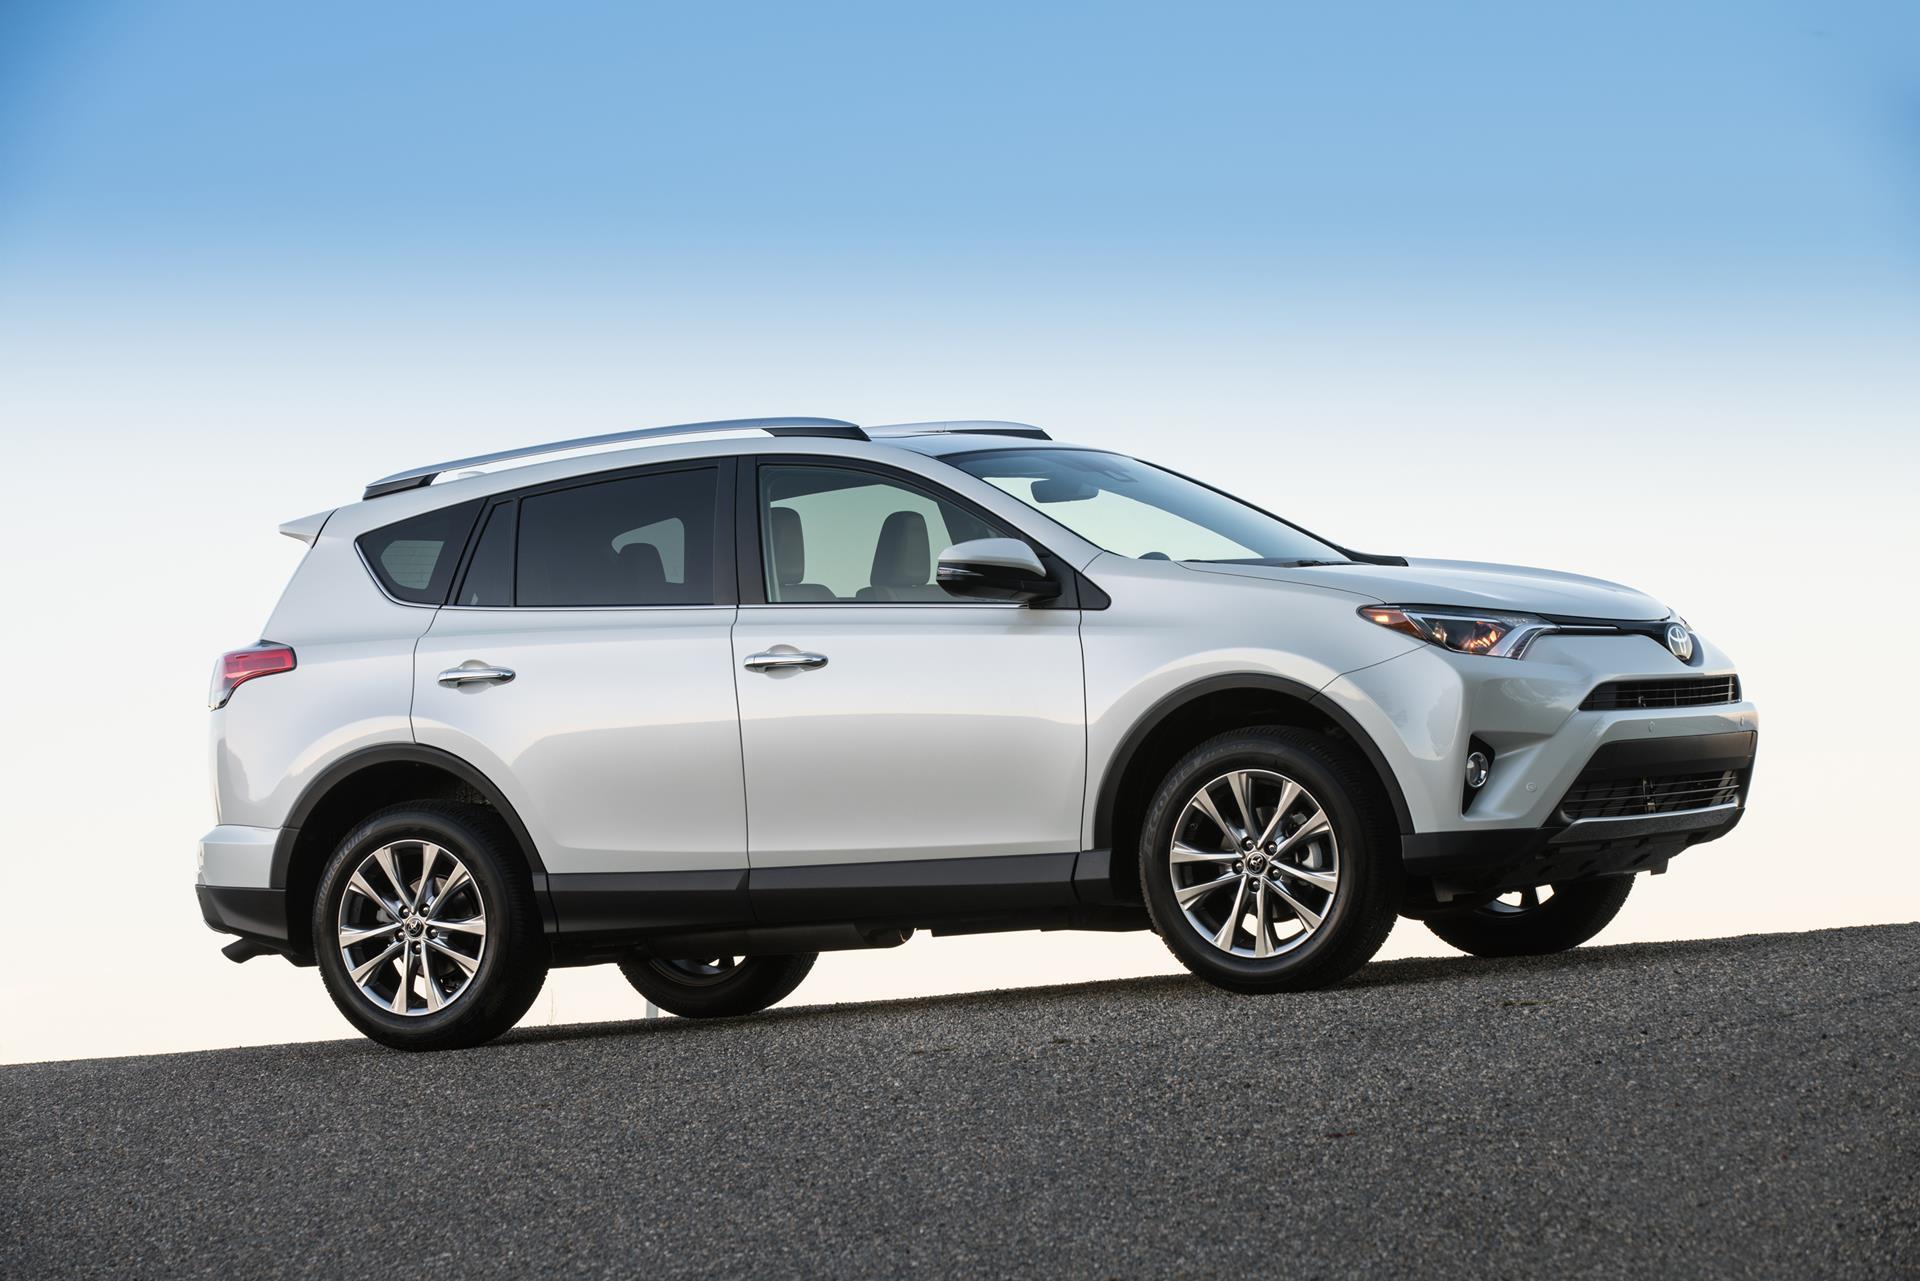 2017 Toyota RAV4 technical and mechanical specifications